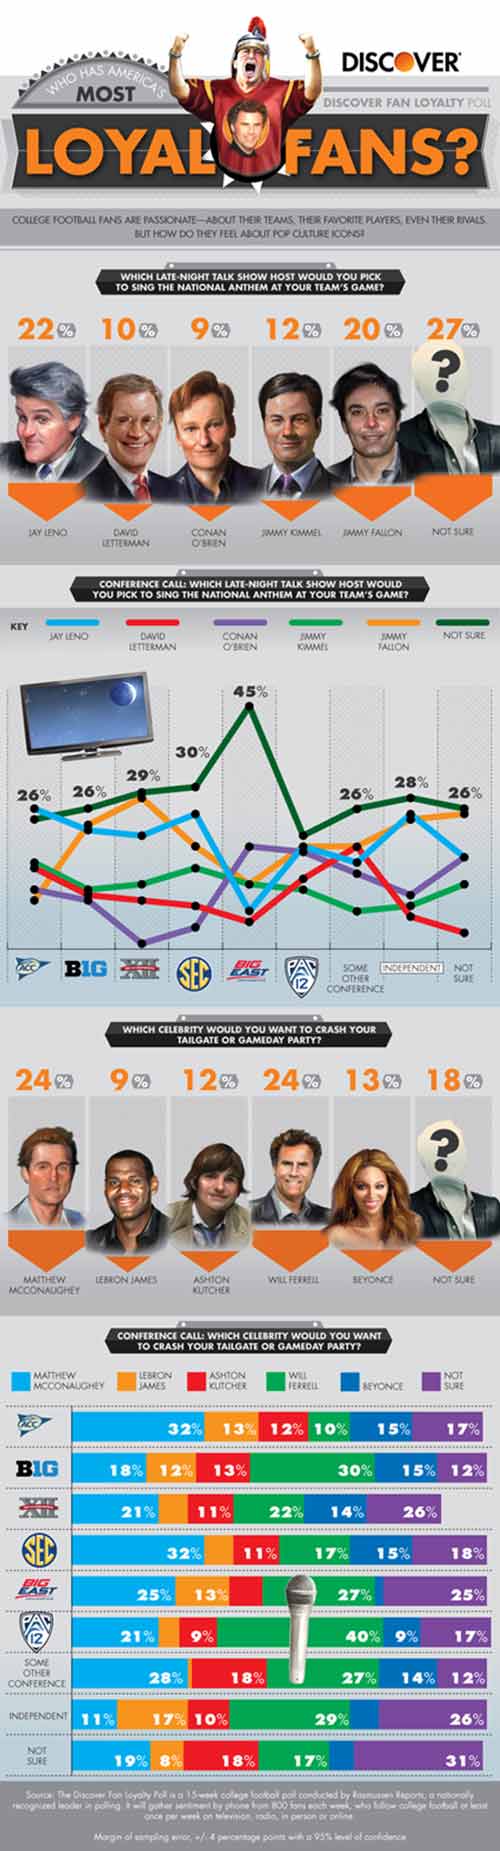 Discover Fan Loyalty Poll Infographic -- Late Show Celebrity